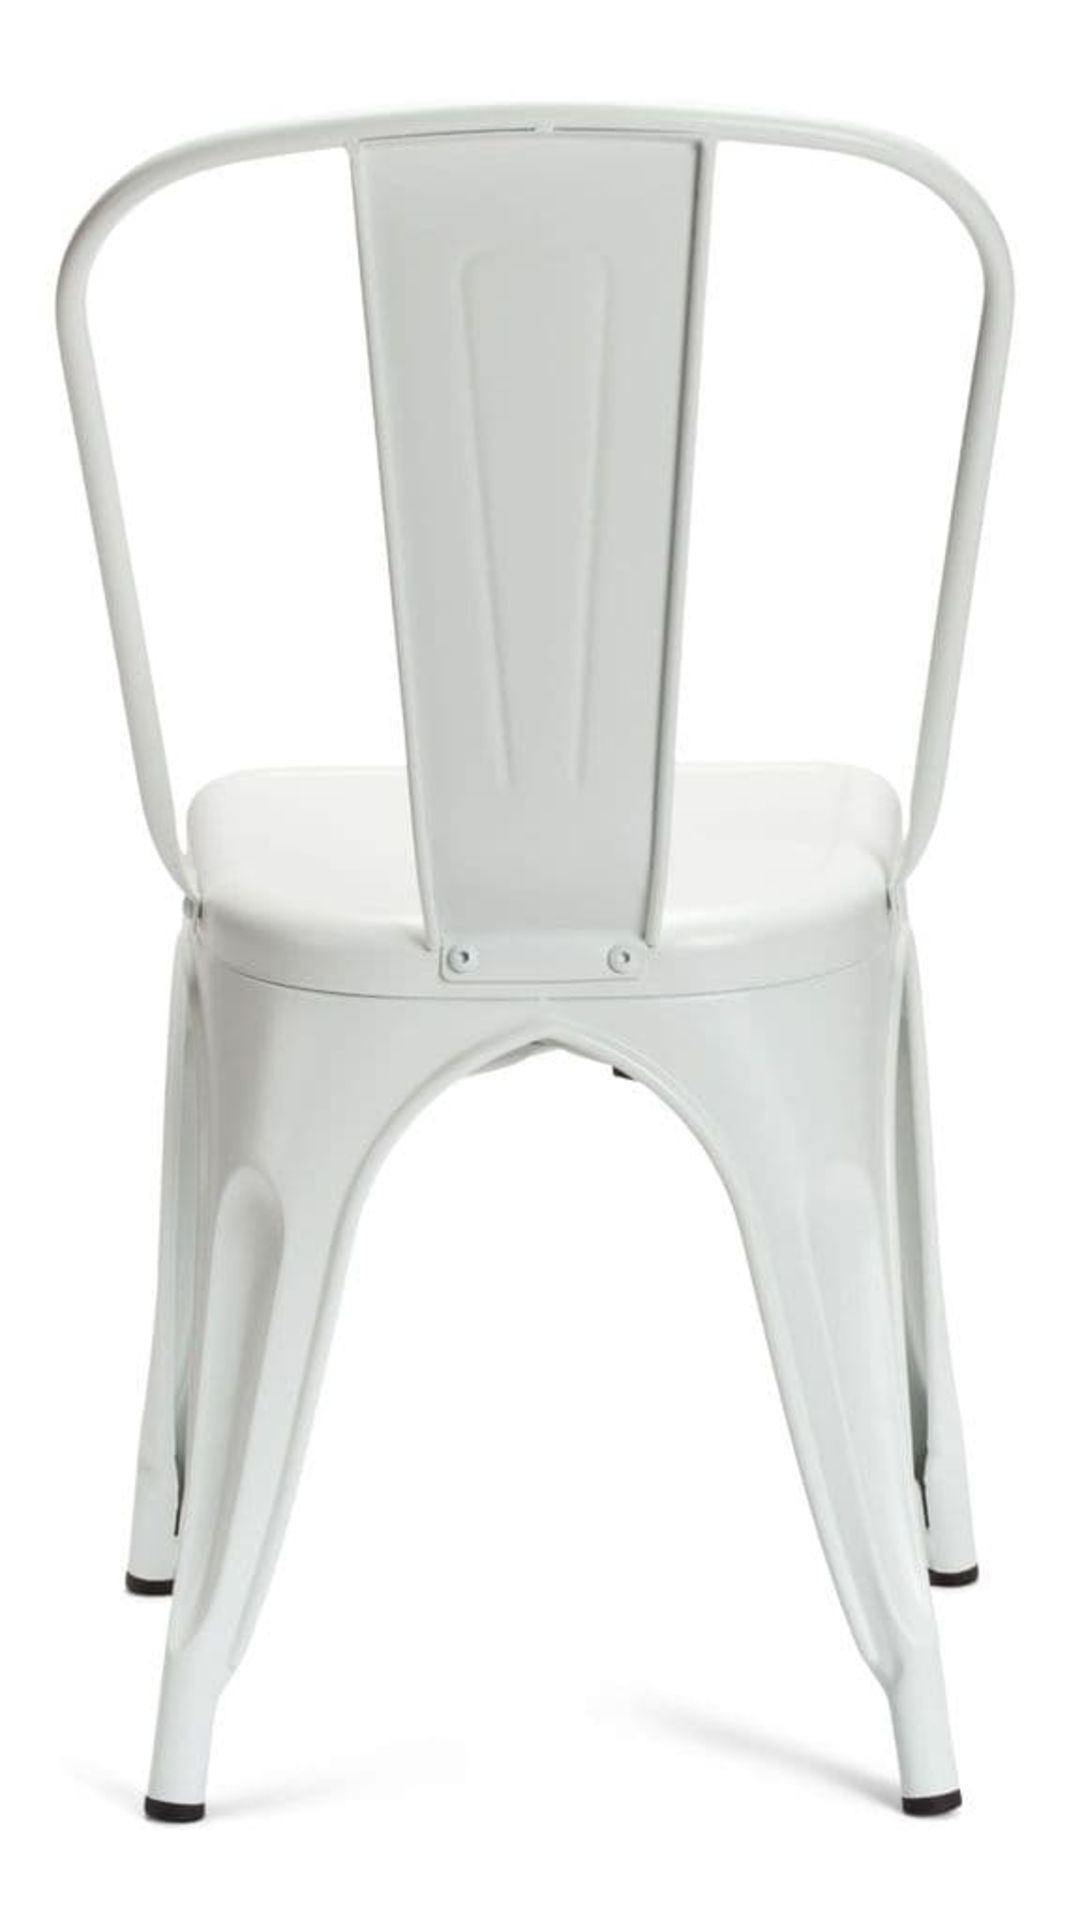 1 x Tolix Industrial Style Outdoor Bistro Table and Chair Set in White- Includes 1 x Table and 4 x - Image 14 of 14